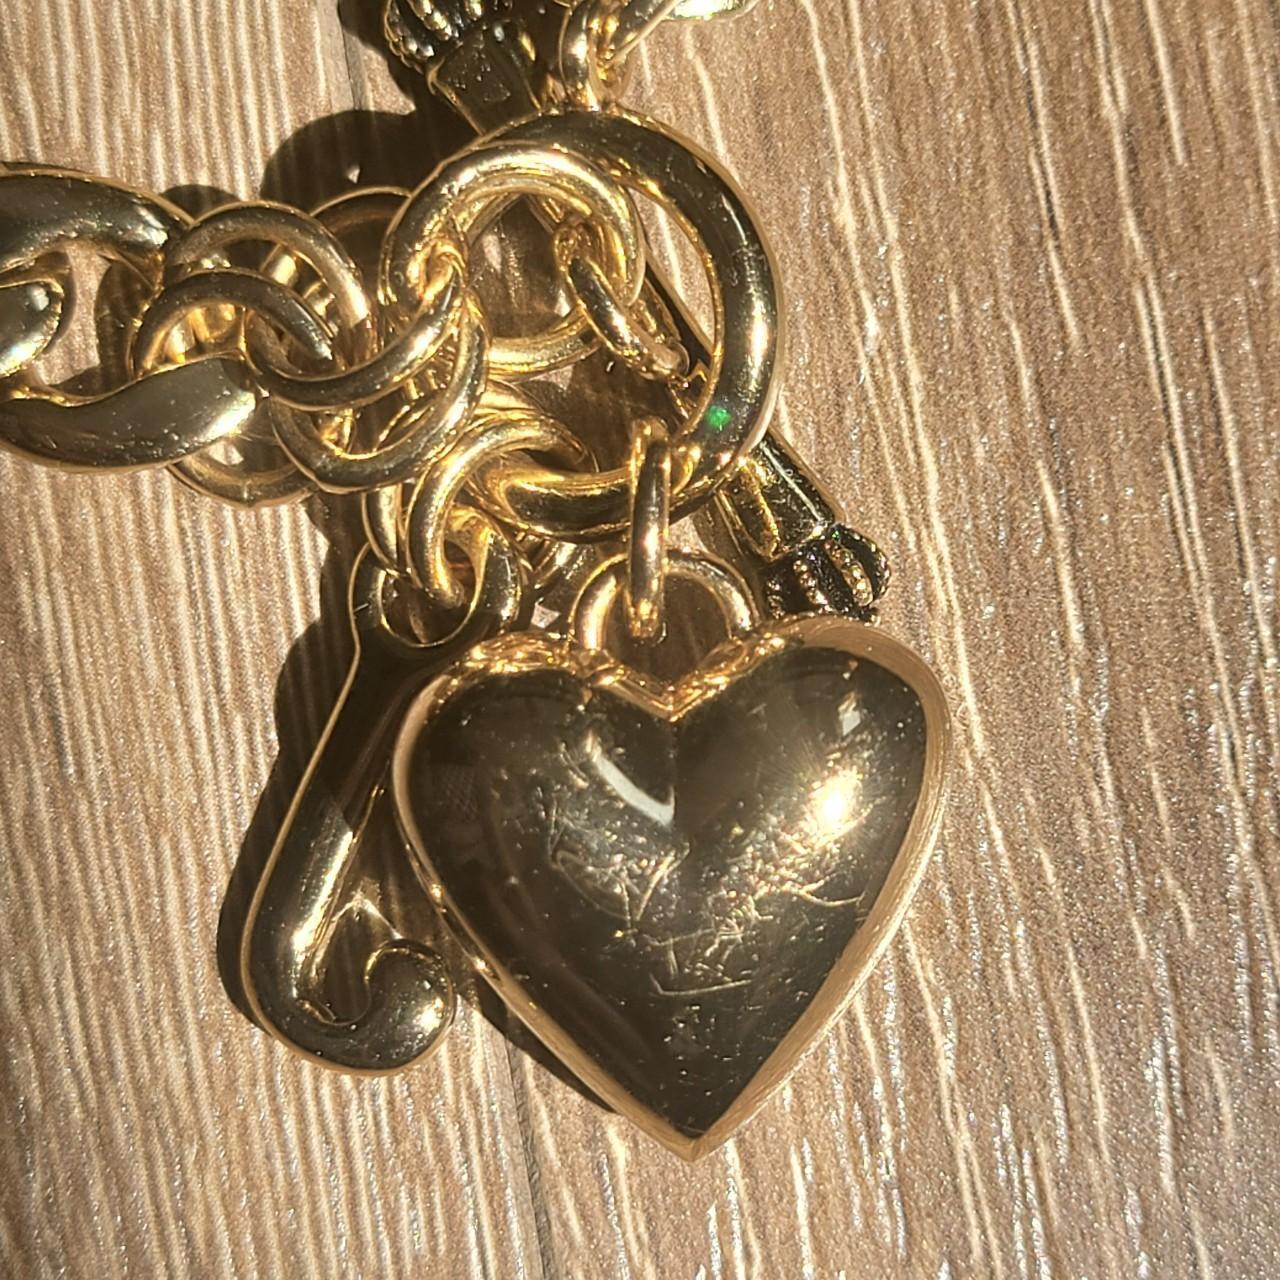 Juicy Couture replenishment Gold Puffed Heart Necklace in Metallic